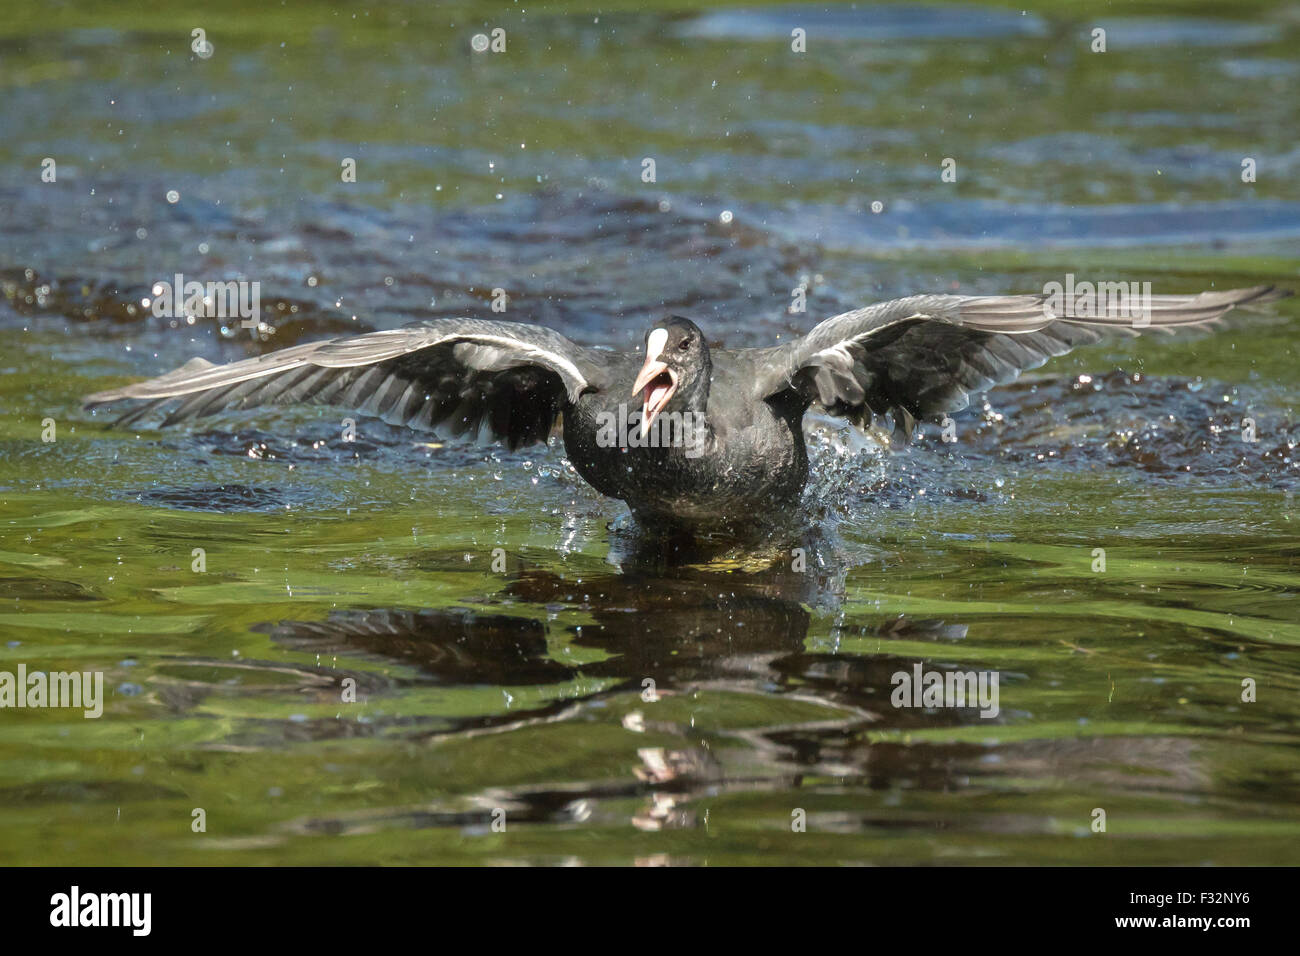 A young eurasian coot Fulica atra running on water during a fight. His wings are spread and reflection on the water is visible. Stock Photo